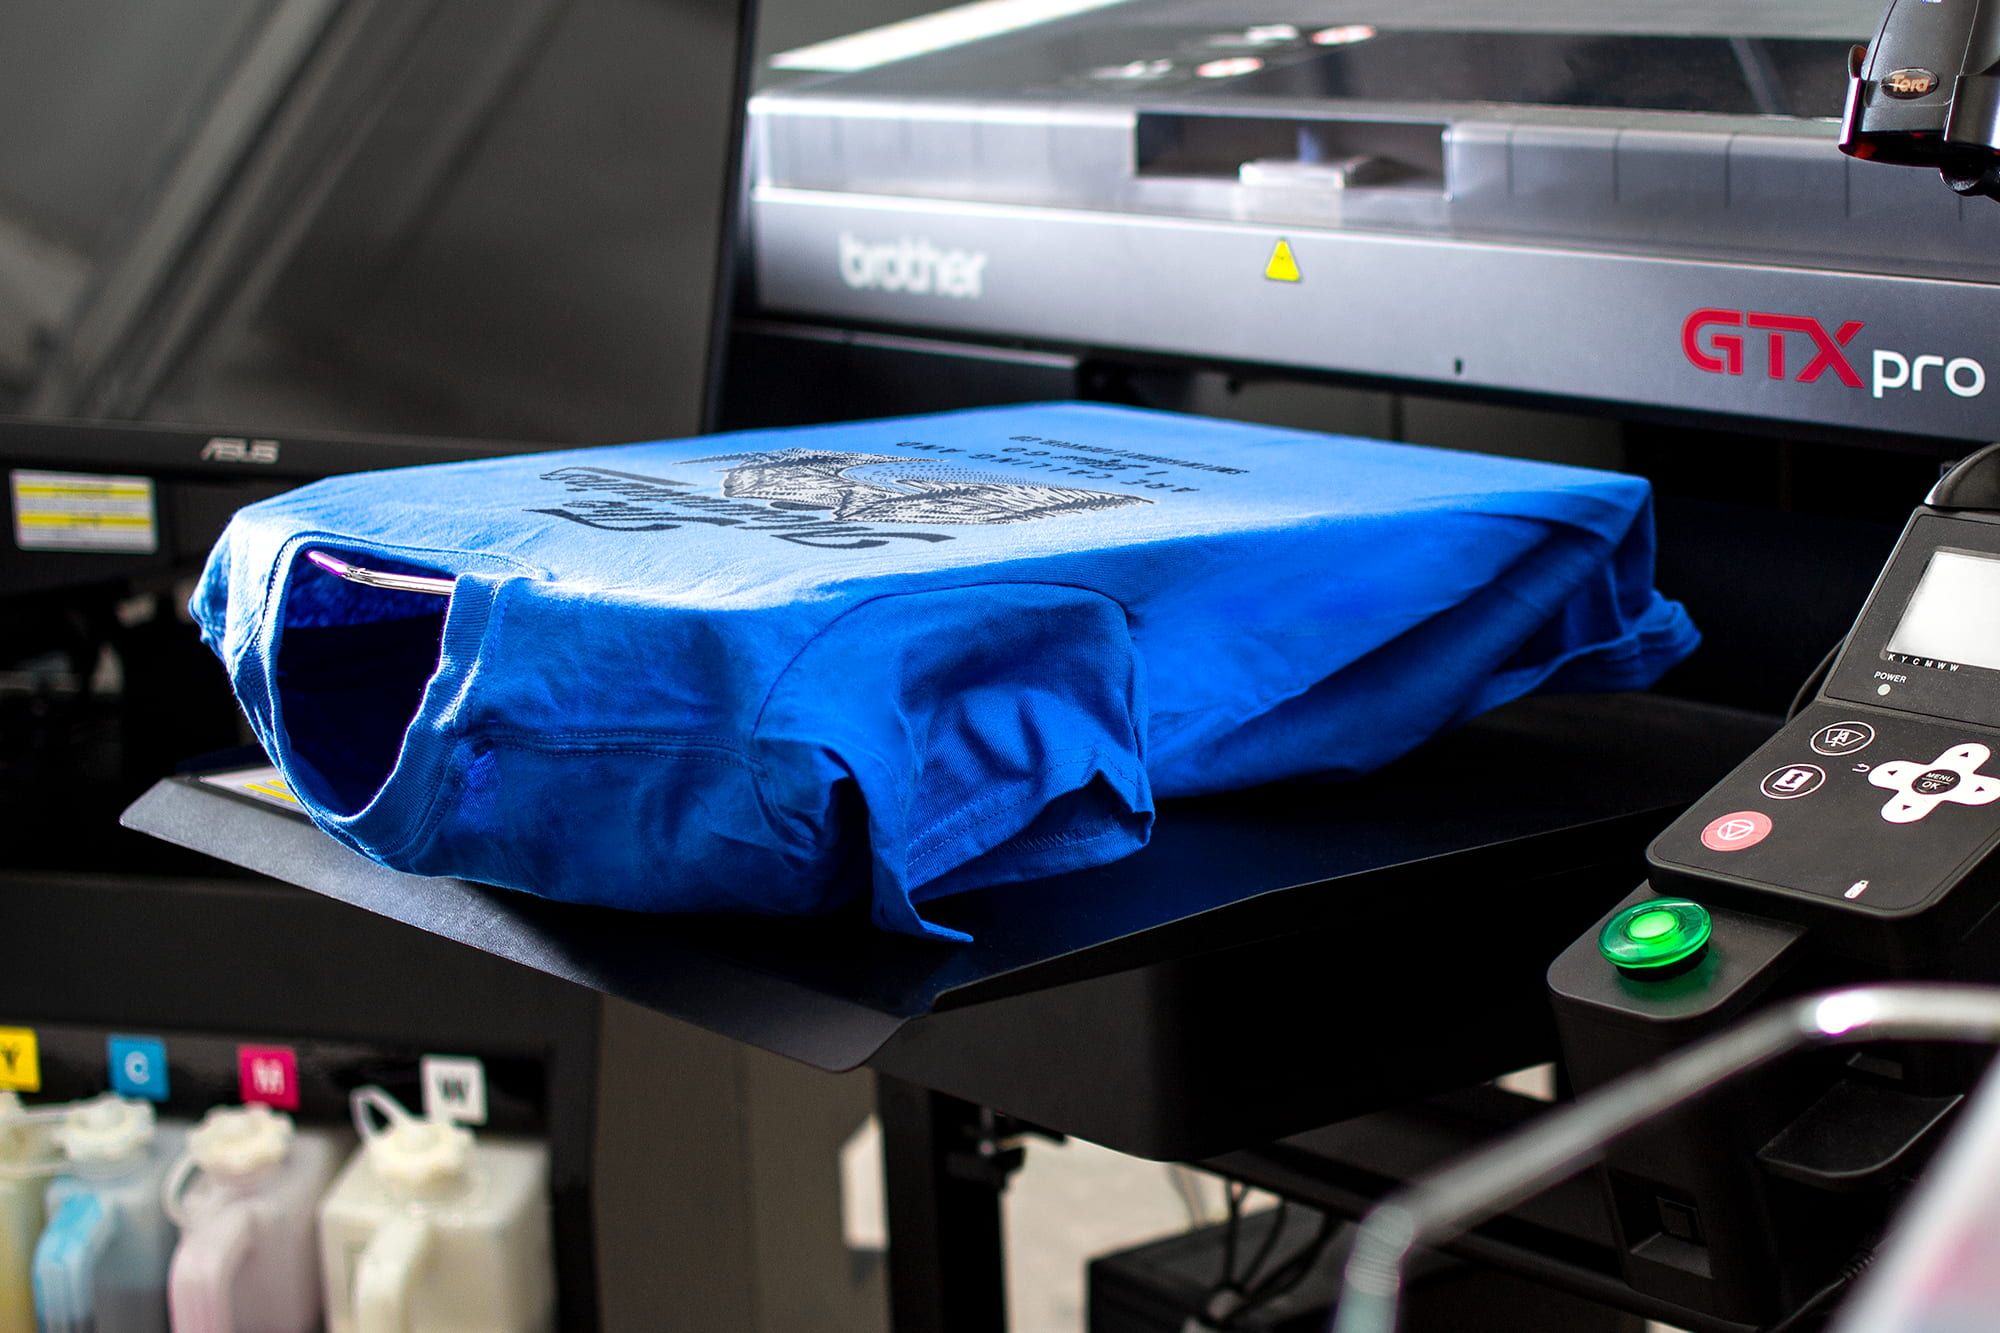 An image showing a single t-shirt being digitally printed for a customer.